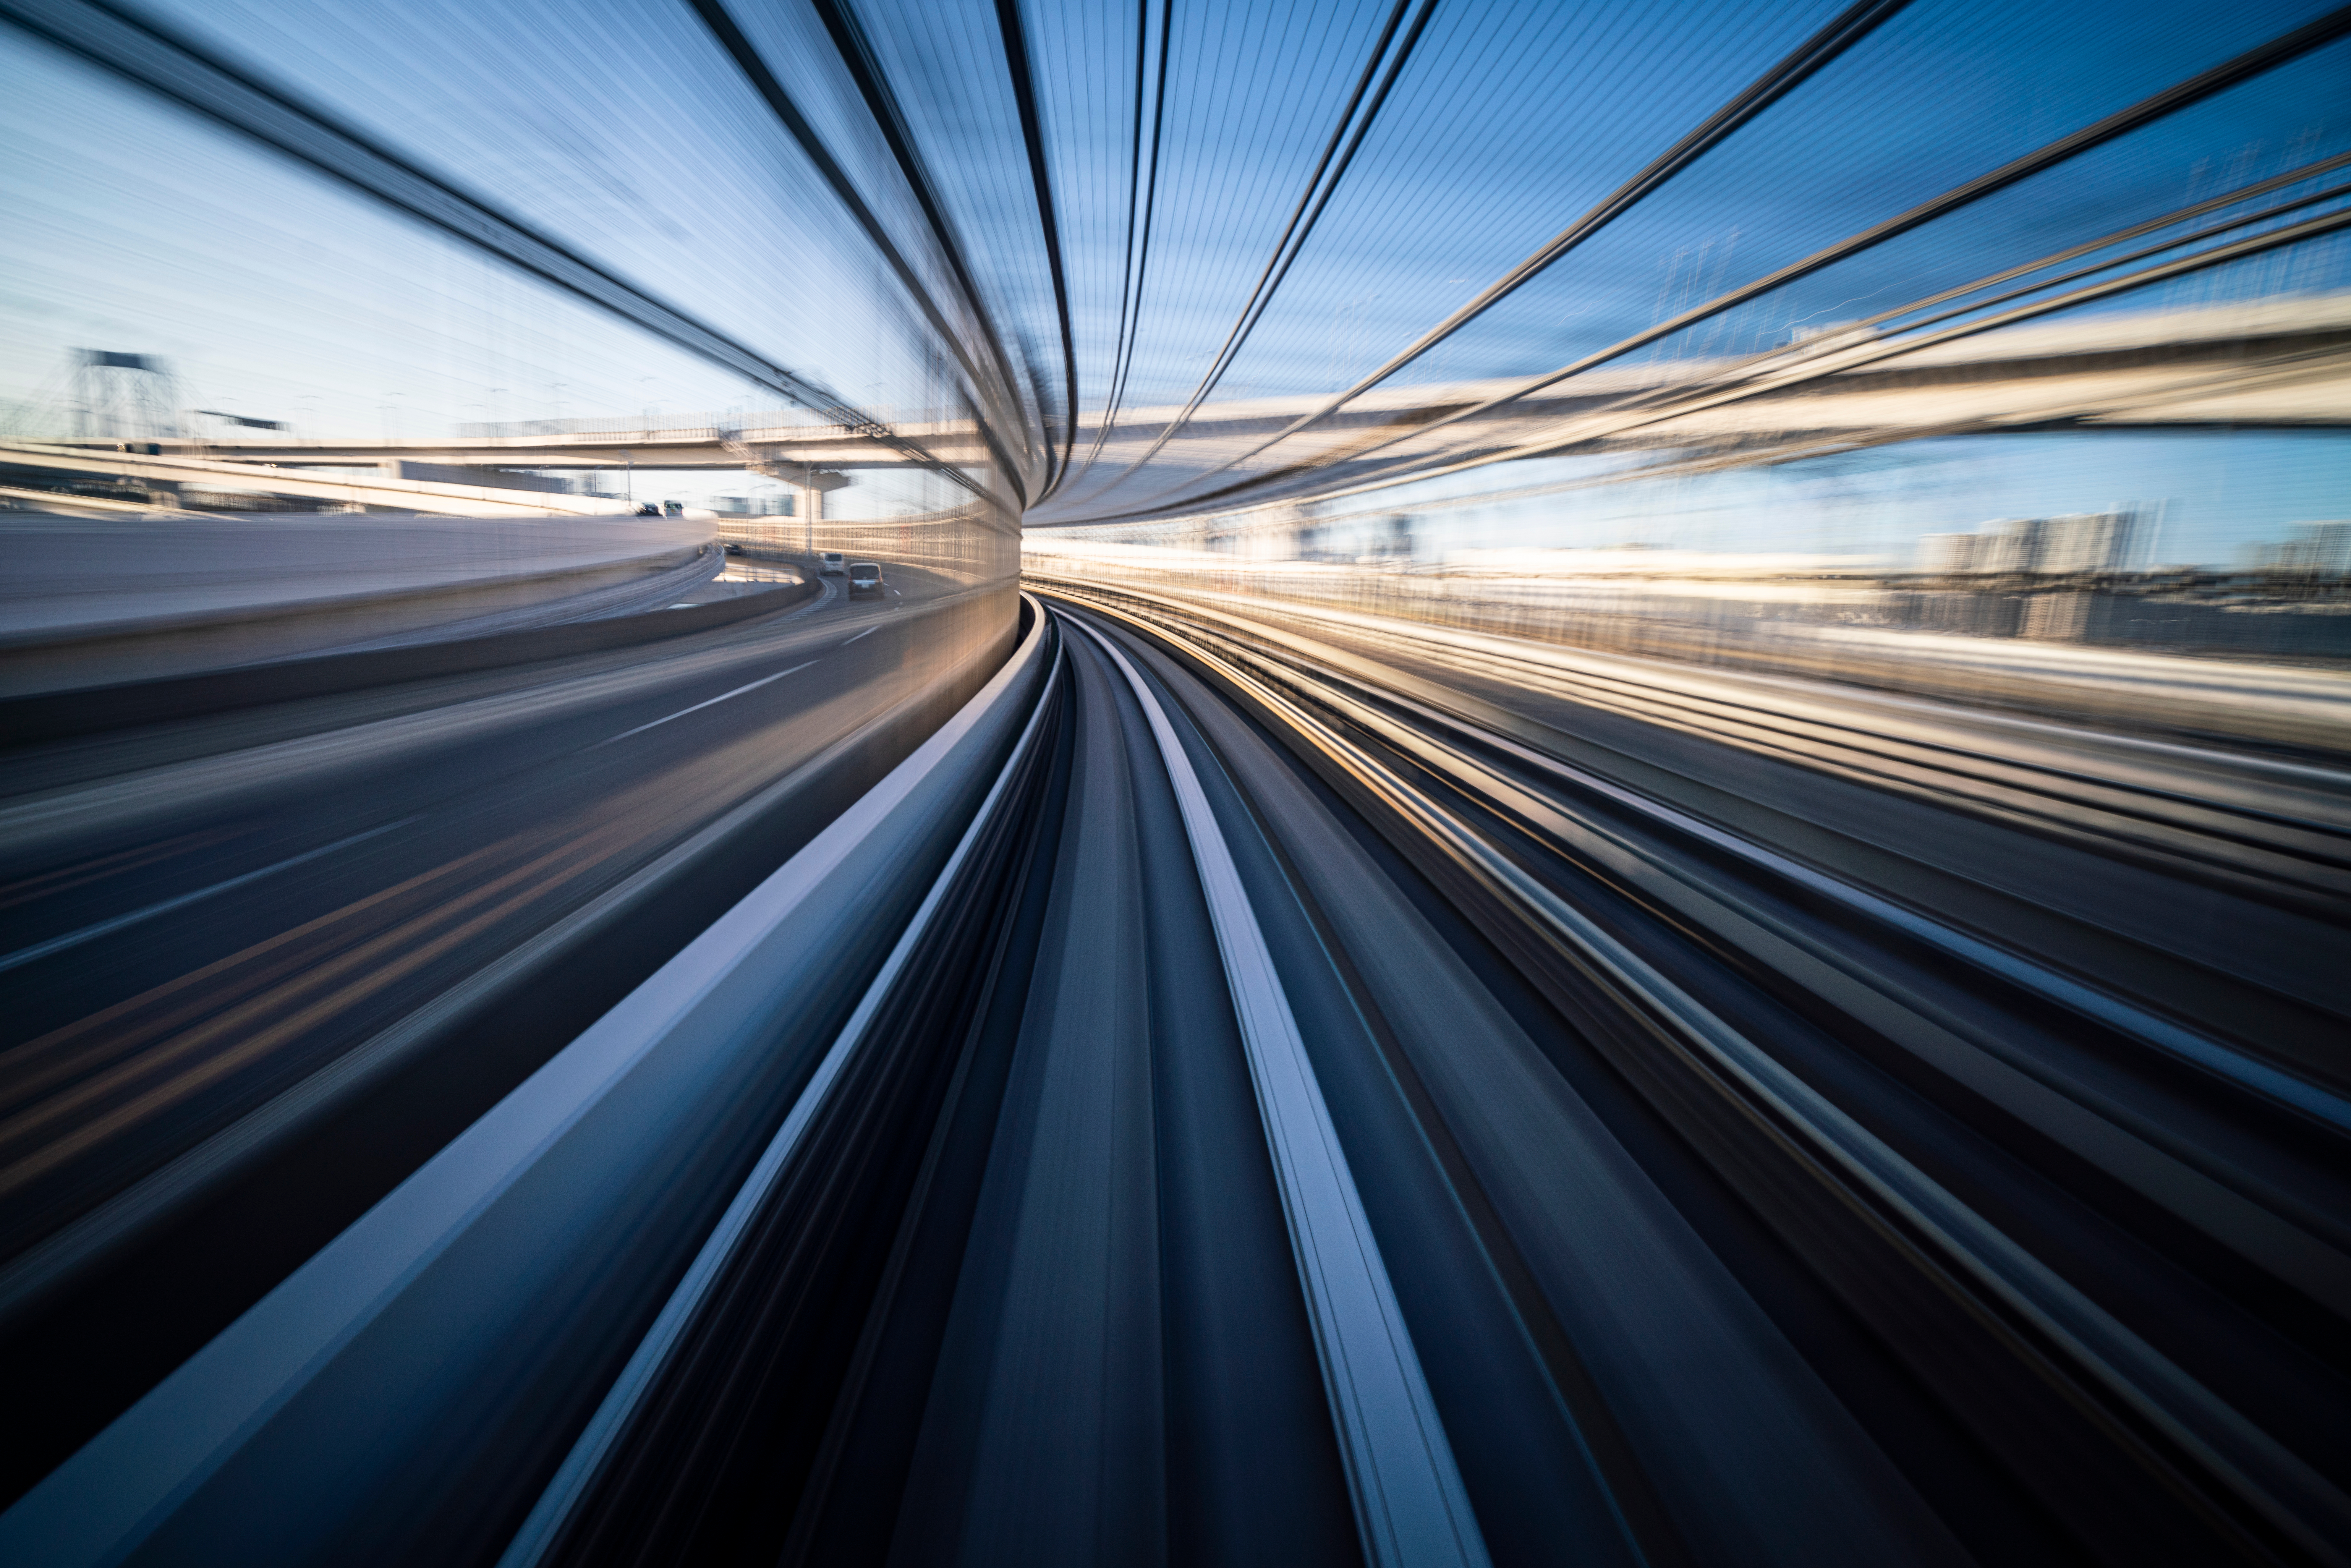 Abstract image of a train moving through a tunnnel fast